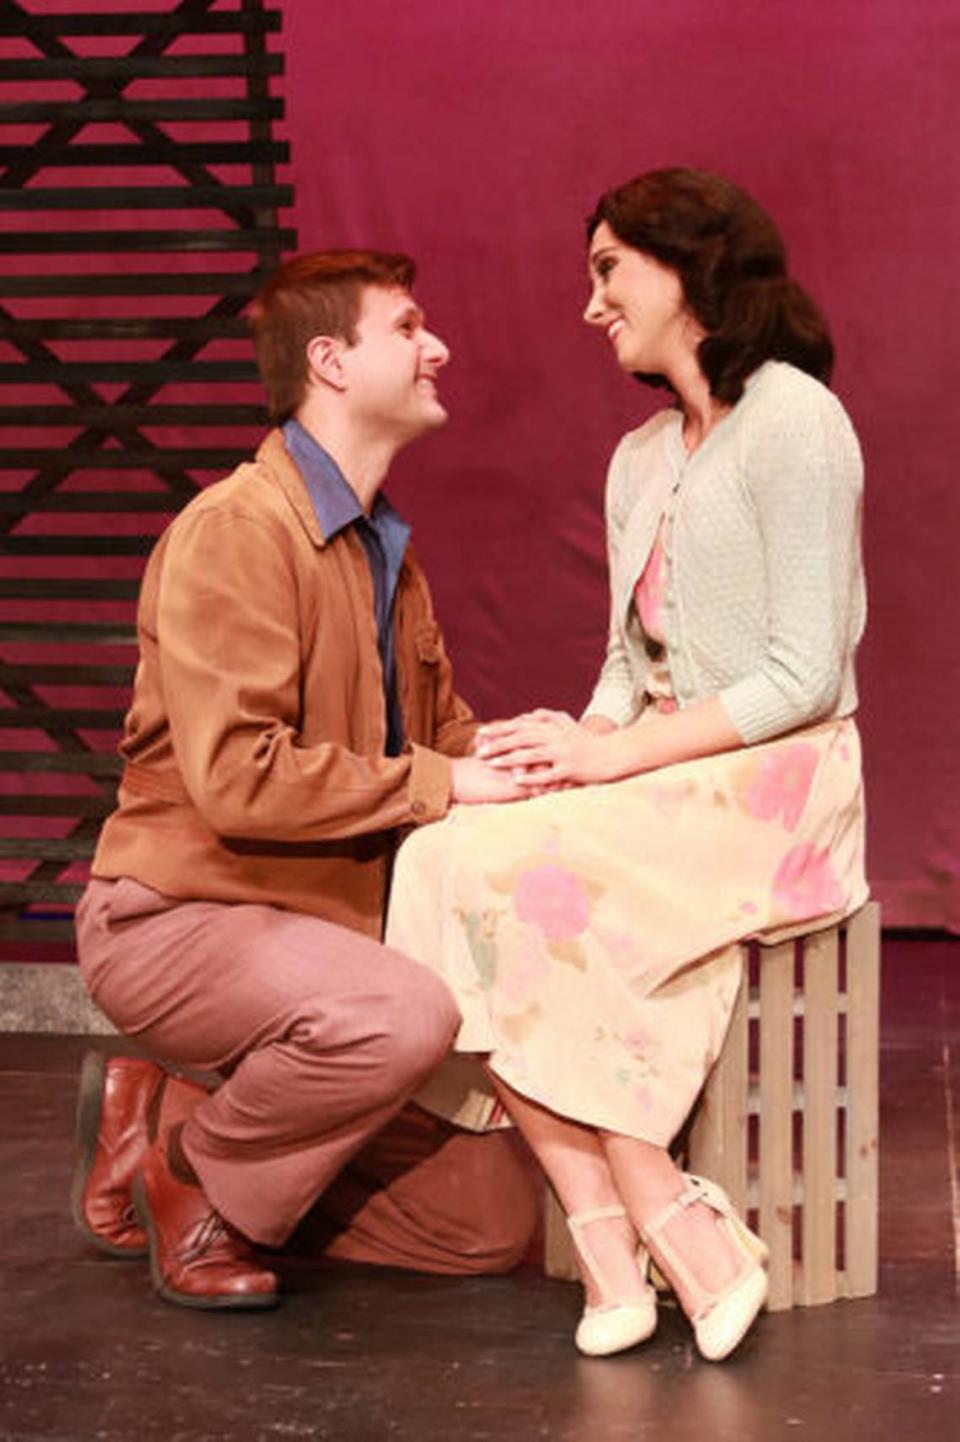 Teddy Warren as Billy Cane and Alexandra Van Hasselt as Margo Crawford discover a new dimension to their long friendship in “Bright Star” at Actors’ Playhouse (Photo courtesy of Alberto Romeu)